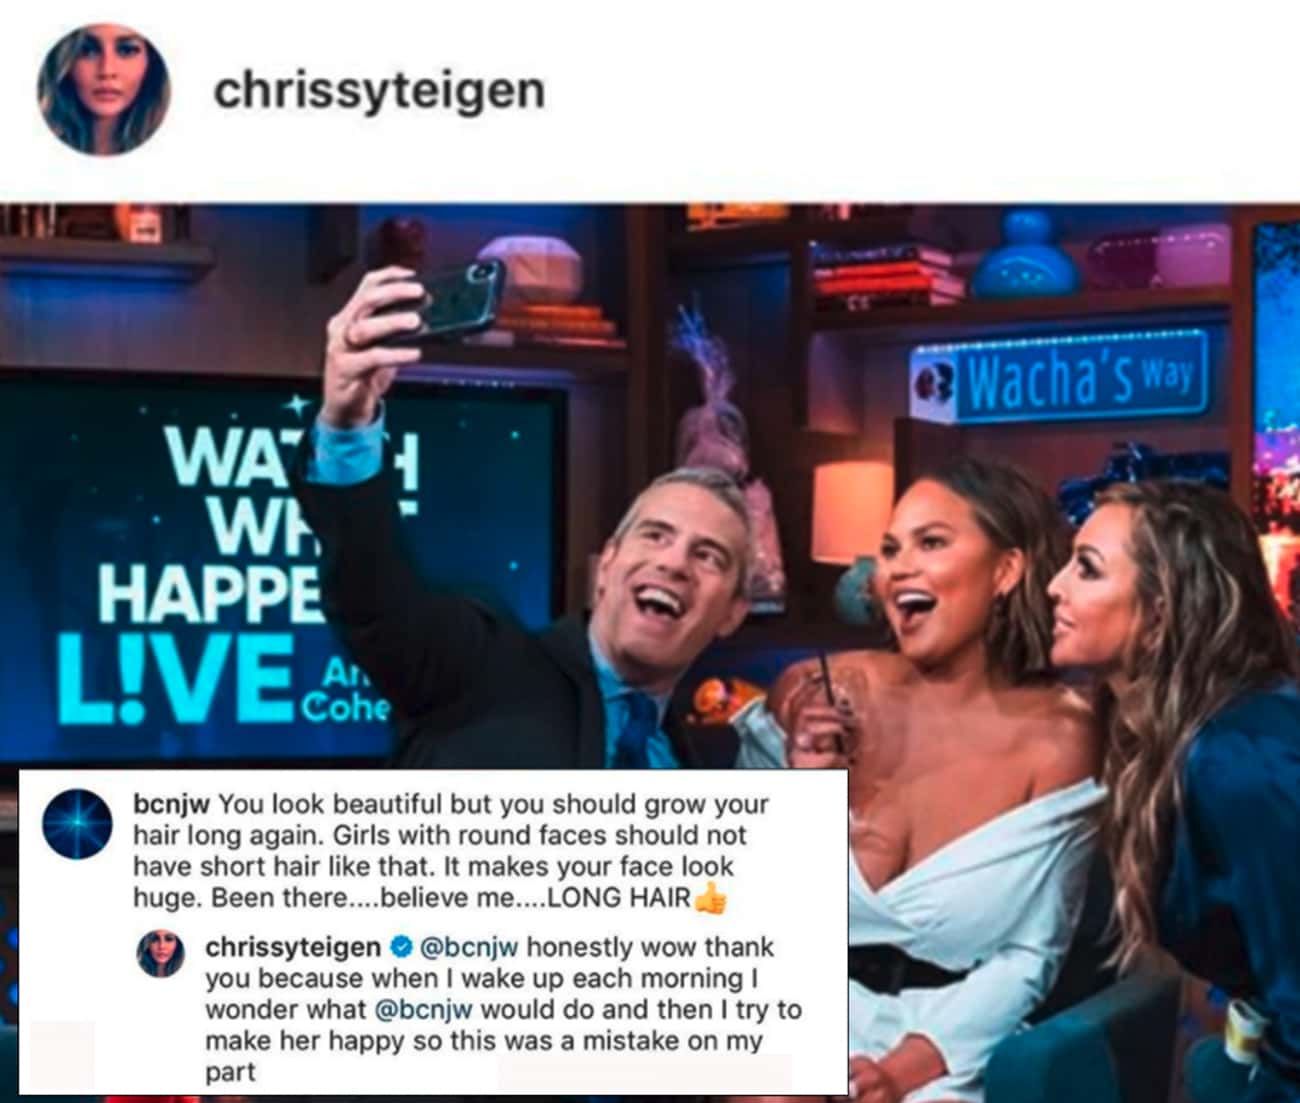 celebs savage replies - television program - chrissyteigen Wa Wh Happe Live Ar Cohe bcnjw You look beautiful but you should grow your hair long again. Girls with round faces should not have short hair that. It makes your face look huge. Been there....beli